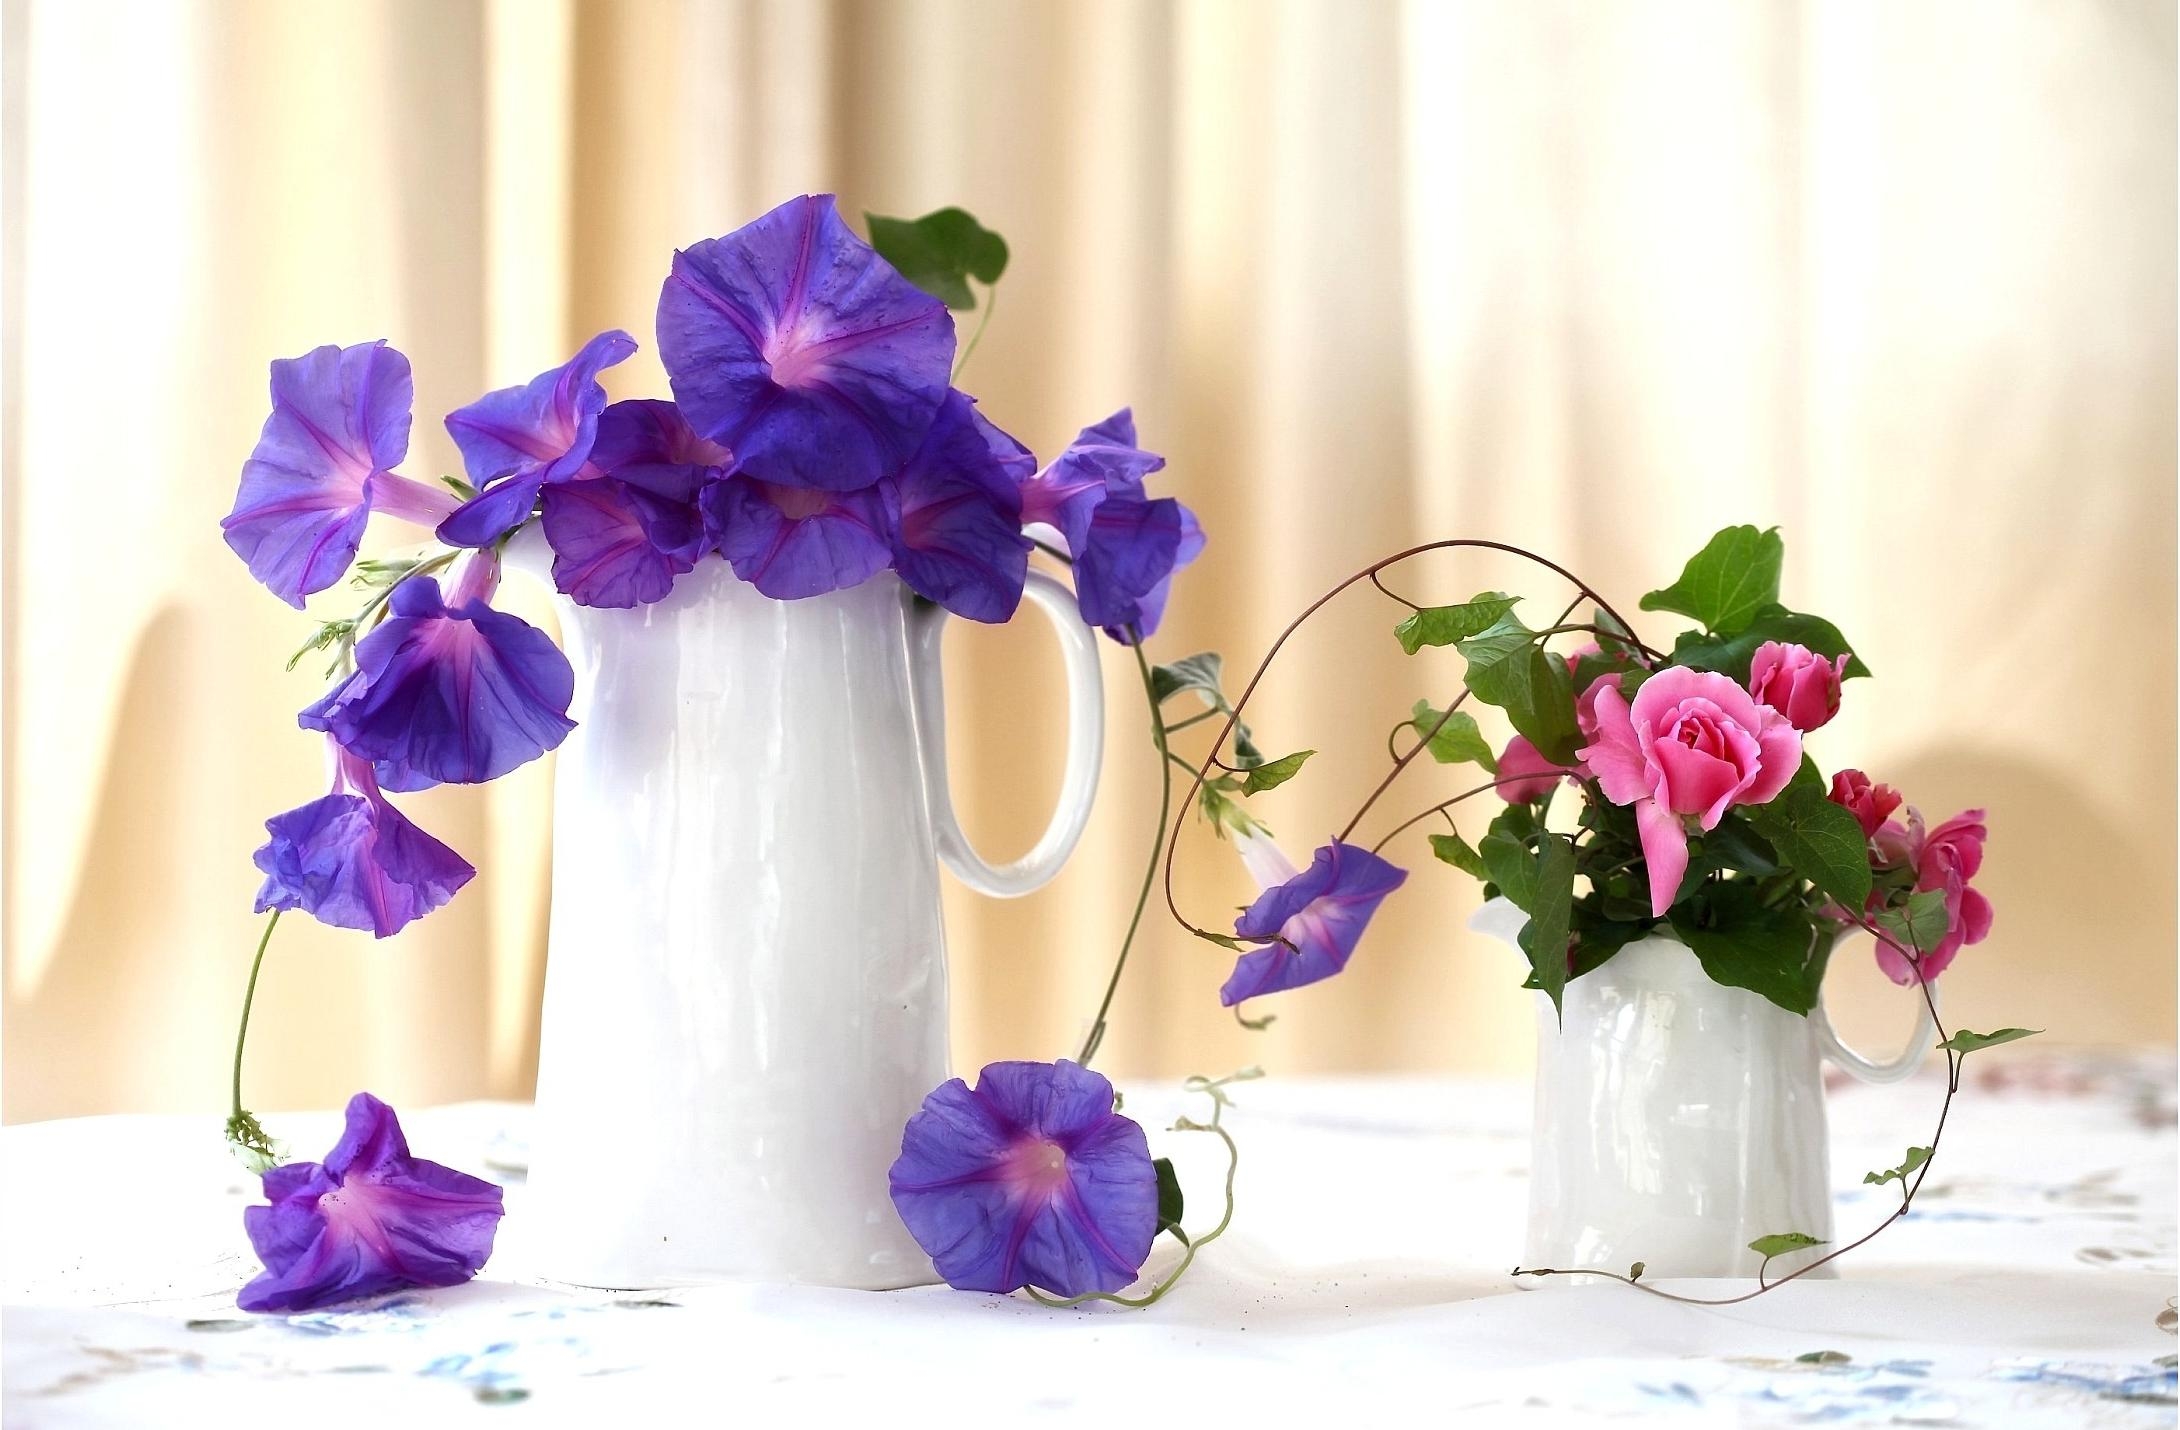 wallpapers morning glory, handsomely, roses, flowers, composition, it's beautiful, jugs, ipme